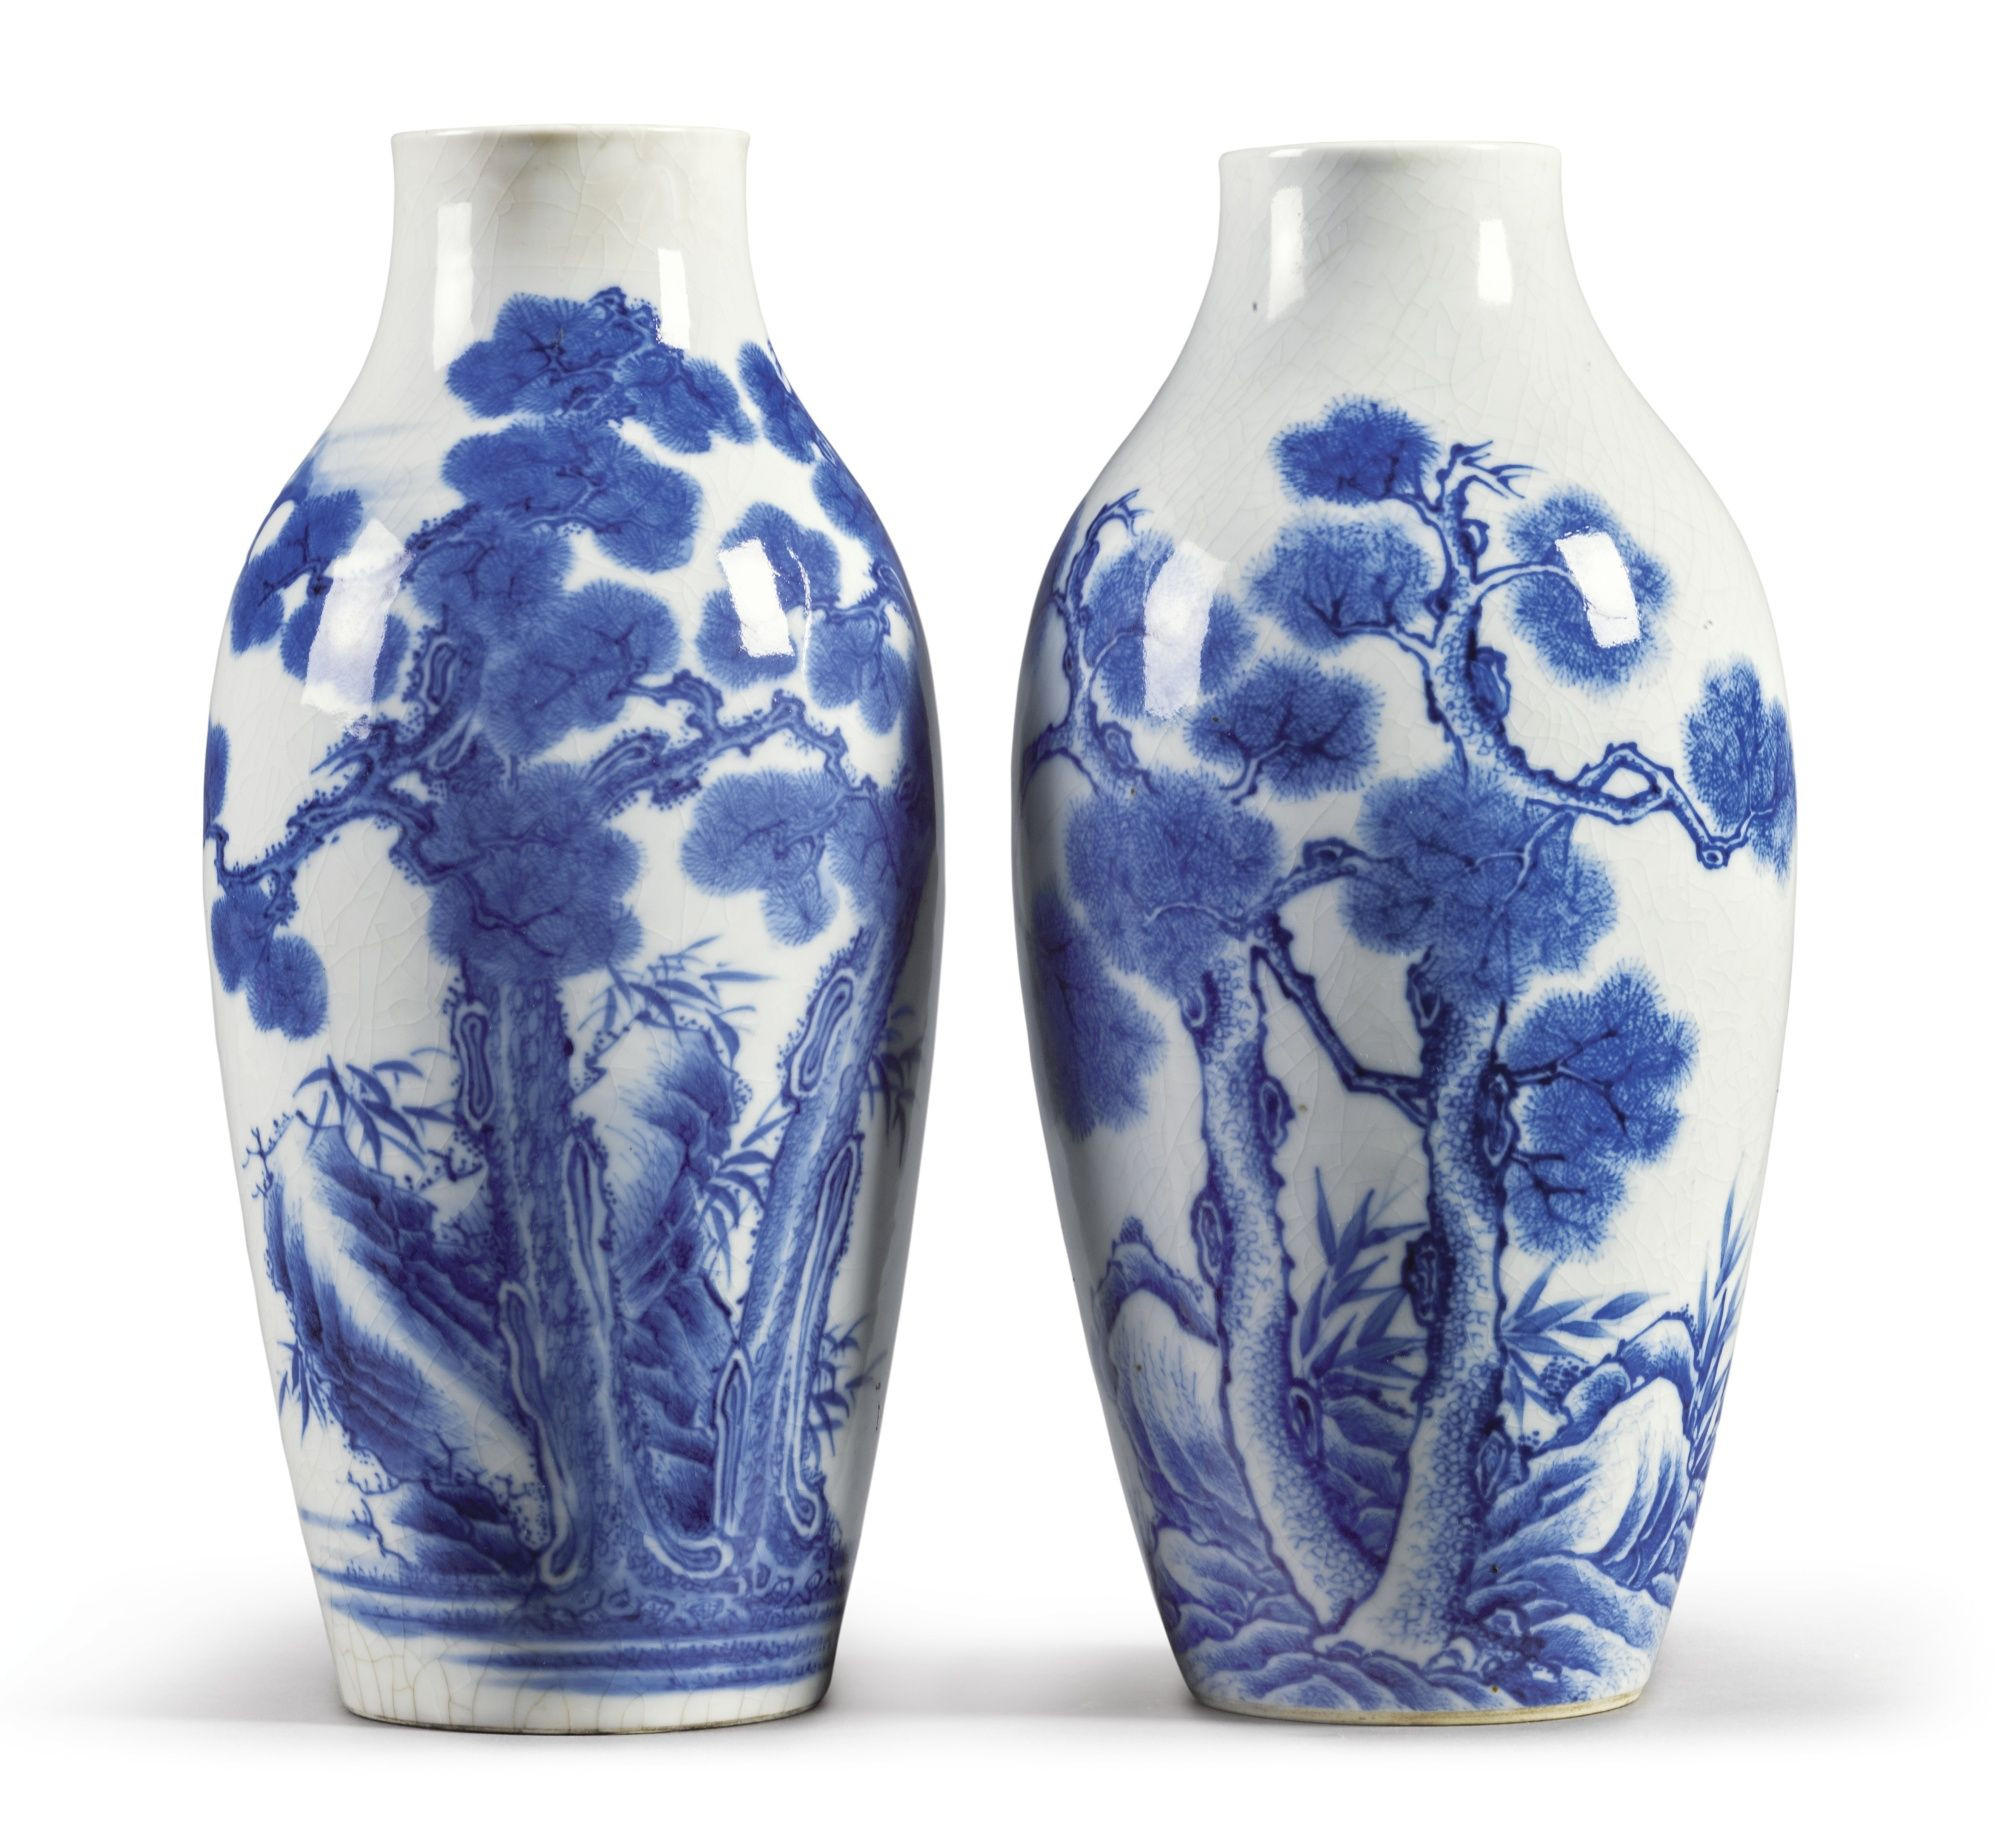 27 Recommended Chinese Meiping Vase 2024 free download chinese meiping vase of image result for antique chinese vase hurricanevasesdecor with two soft paste blue and white vases qing dynasty 18th 19th century